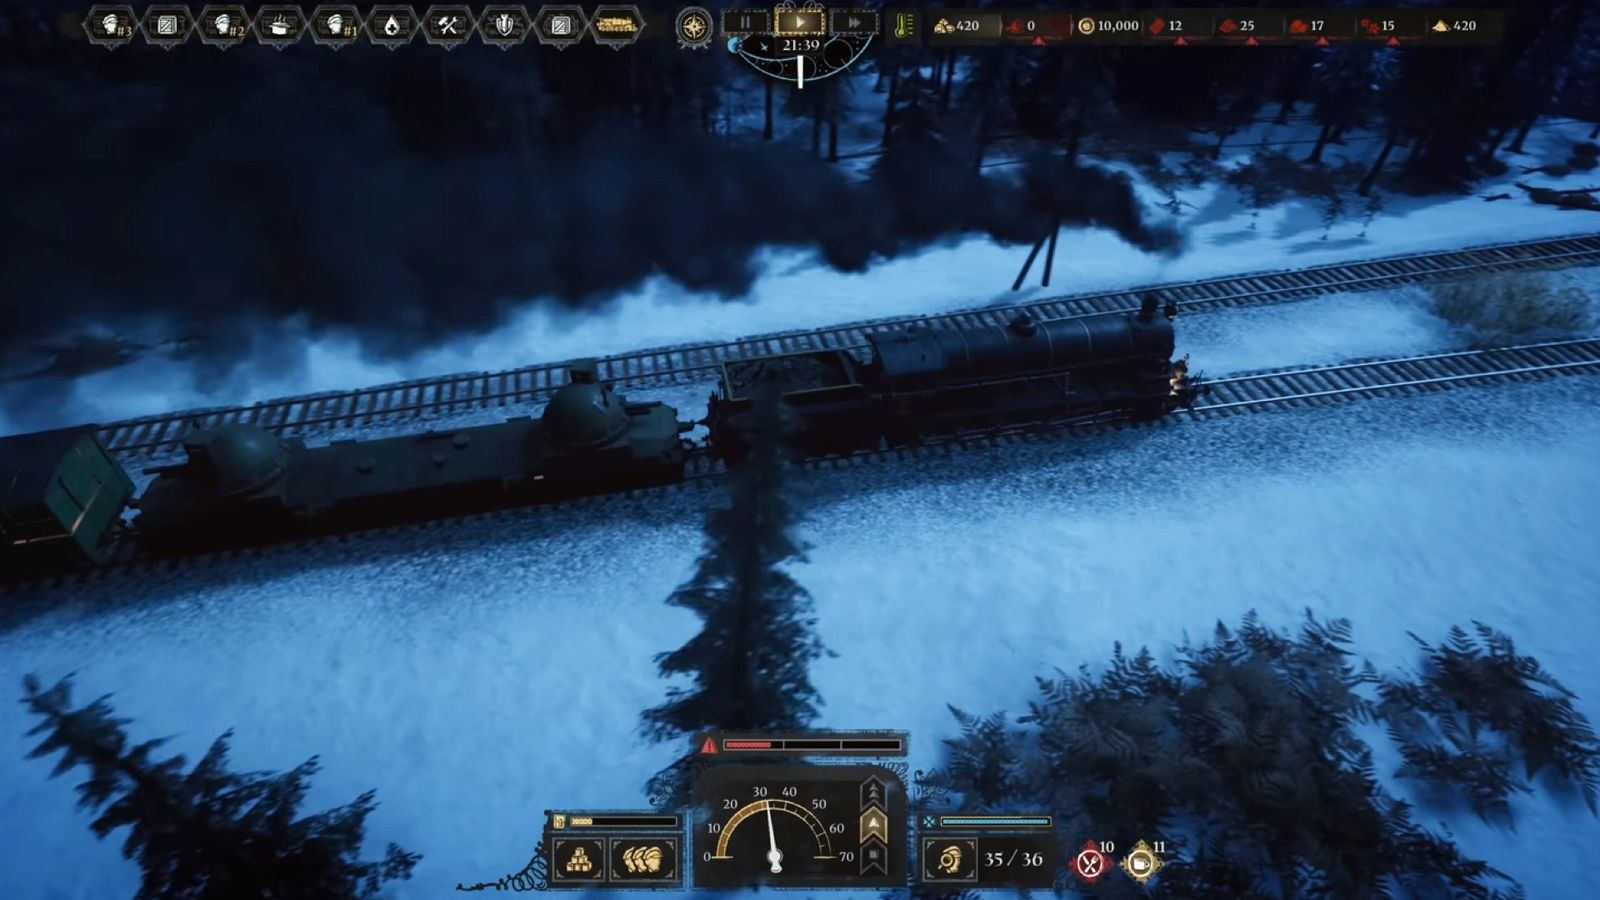 Last Train Home - gameplay screenshot of the train moving on tracks through a snowy forest